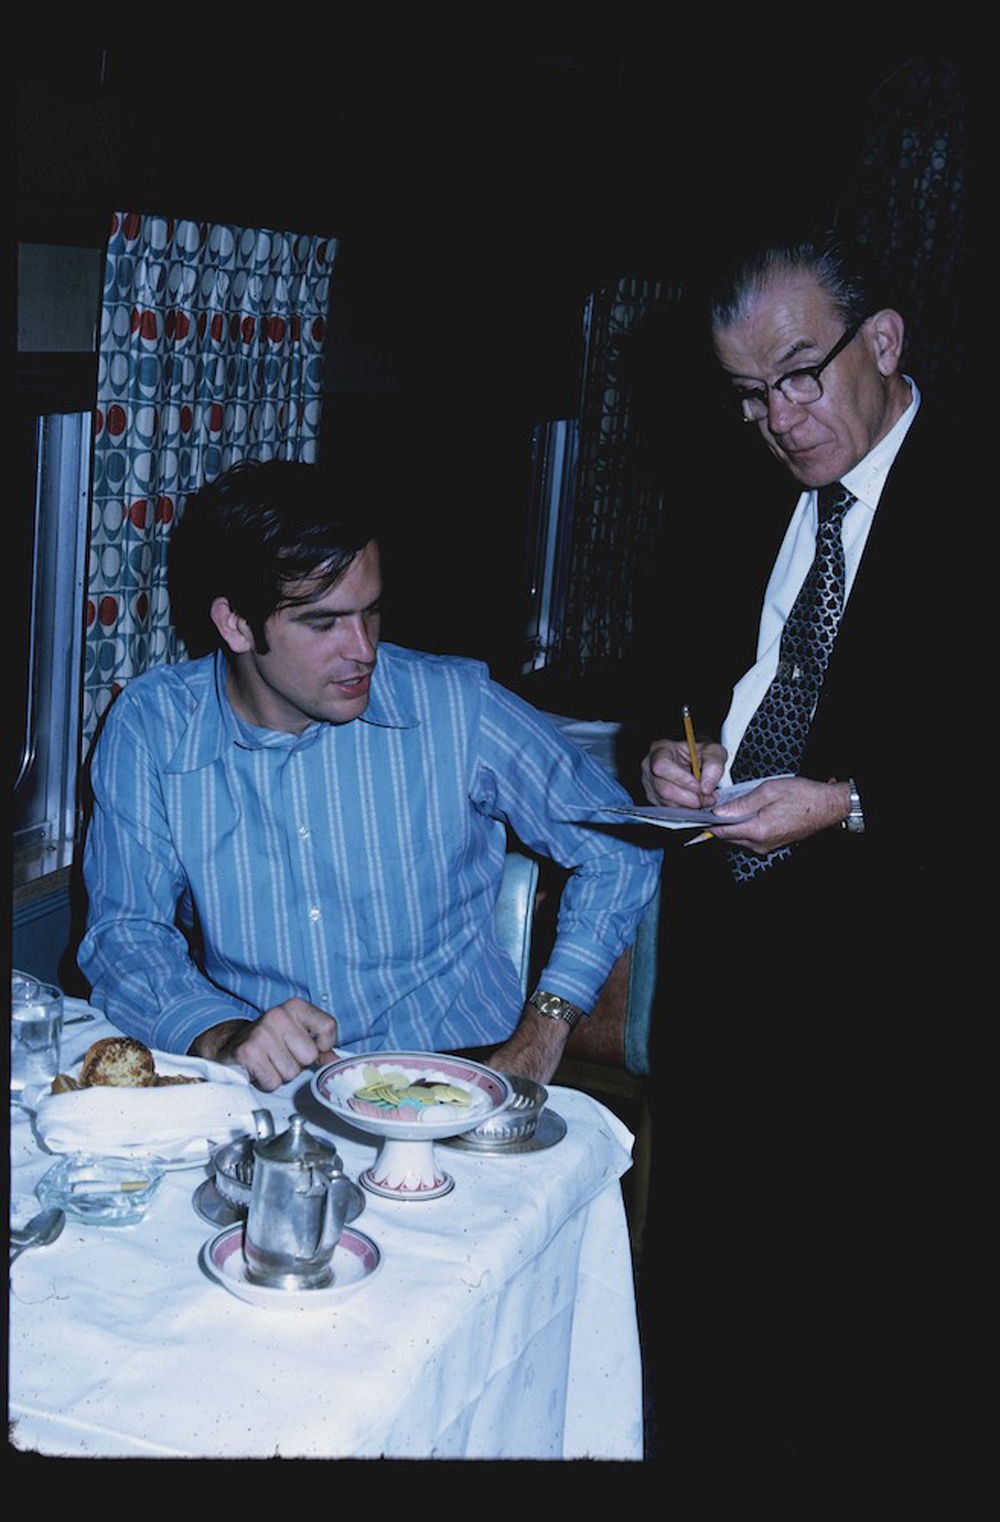 1972 photograph of Bob Johnson and Amtrak dining car steward aboard the Super Chief